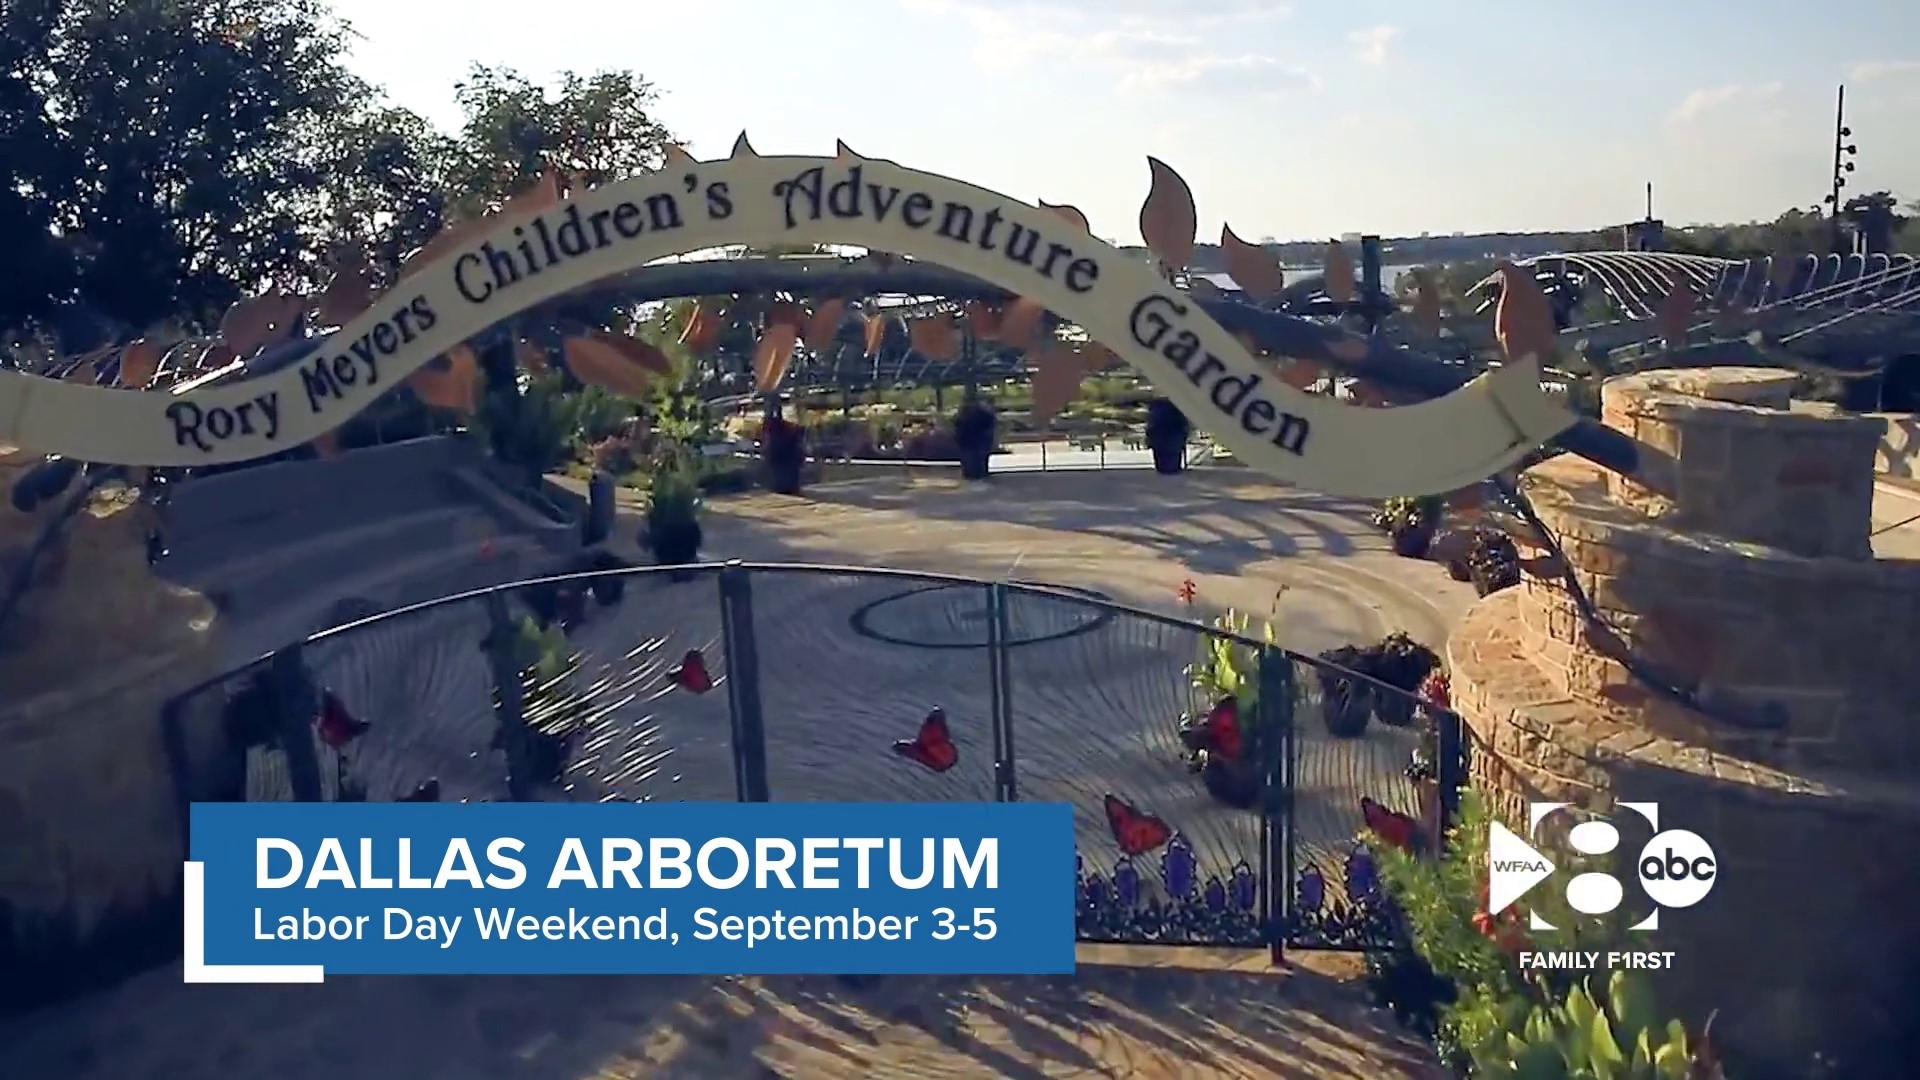 Have fun at the Dallas Arboretum this Labor Day weekend